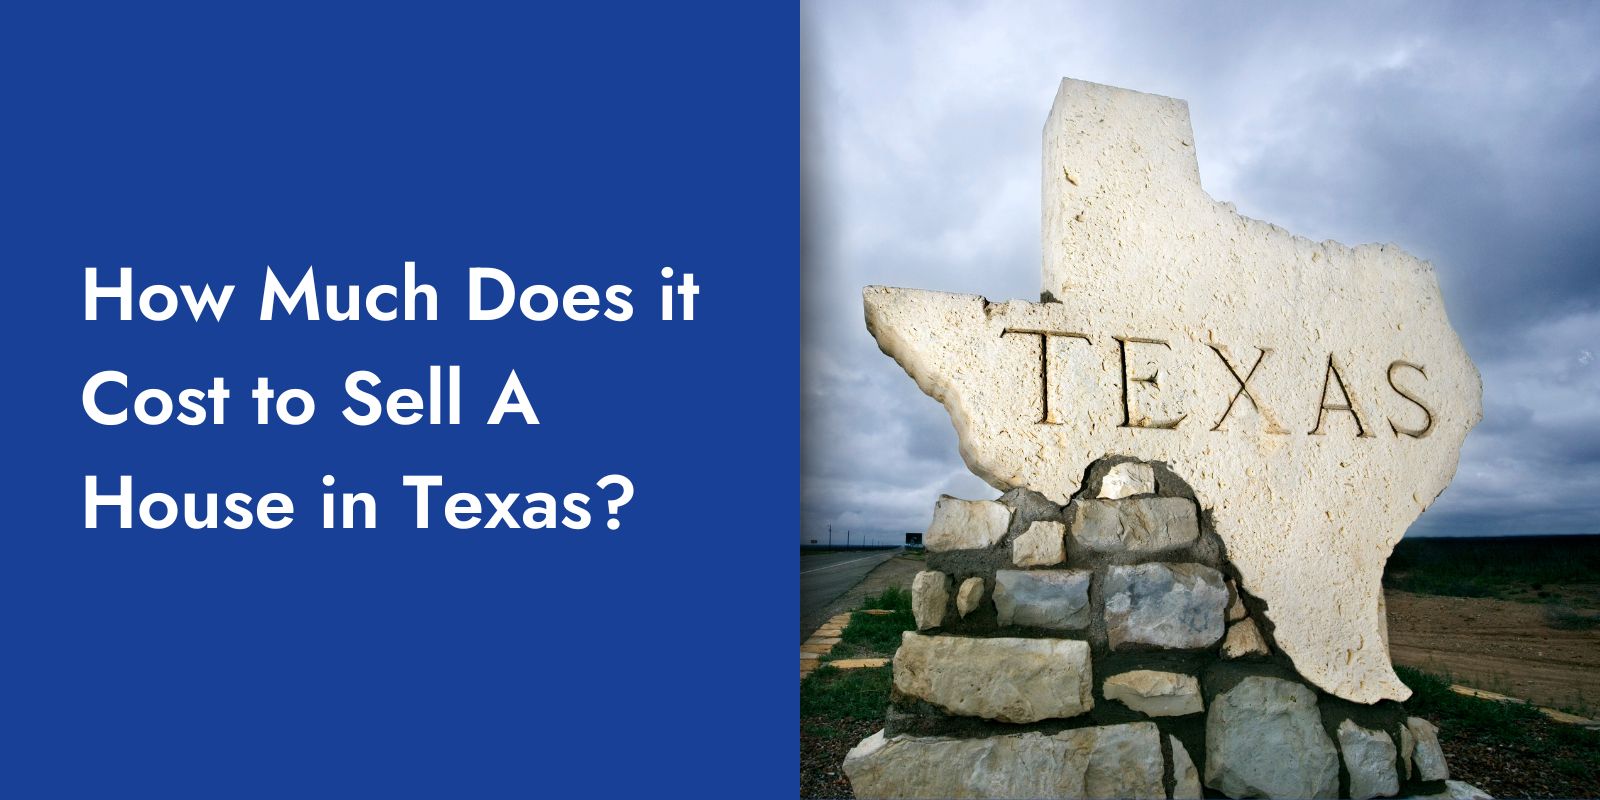 How Much Does it Cost to Sell A House in Texas